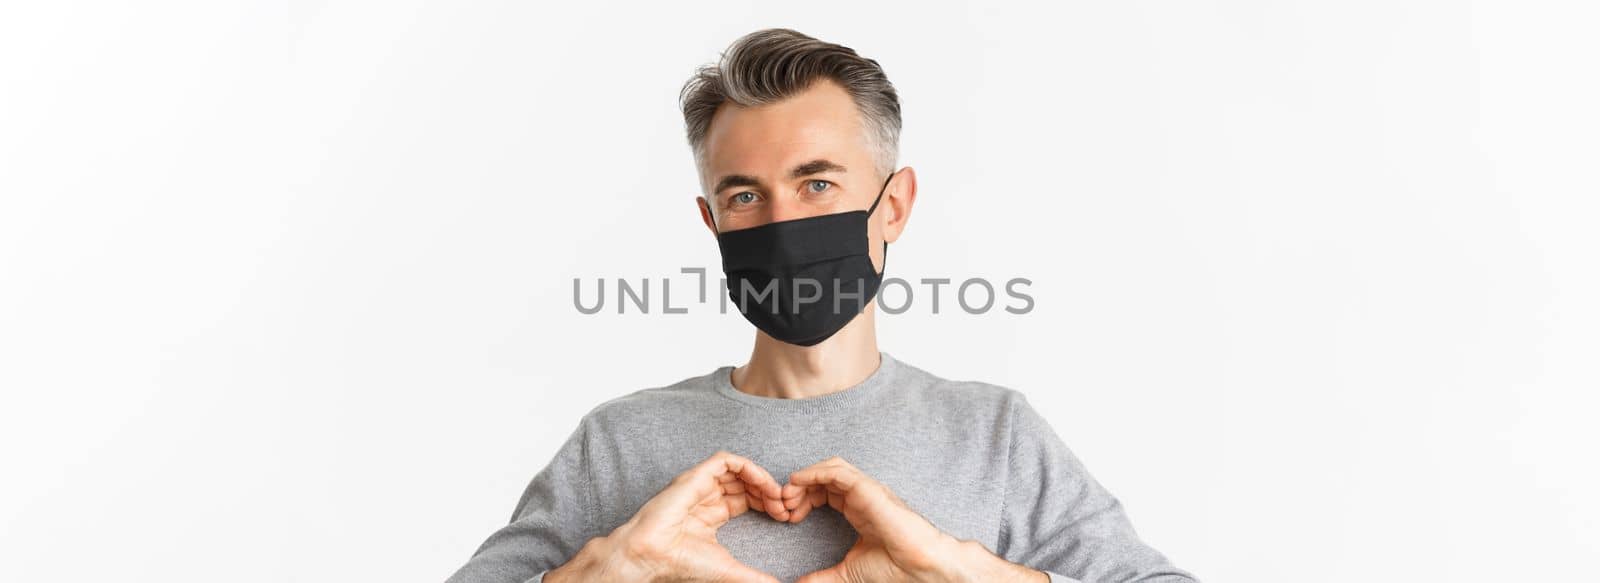 Concept of covid-19, social distancing and quarantine. Close-up of attractive middle-aged man in black medical mask, showing heart sign and smiling, standing over white background.